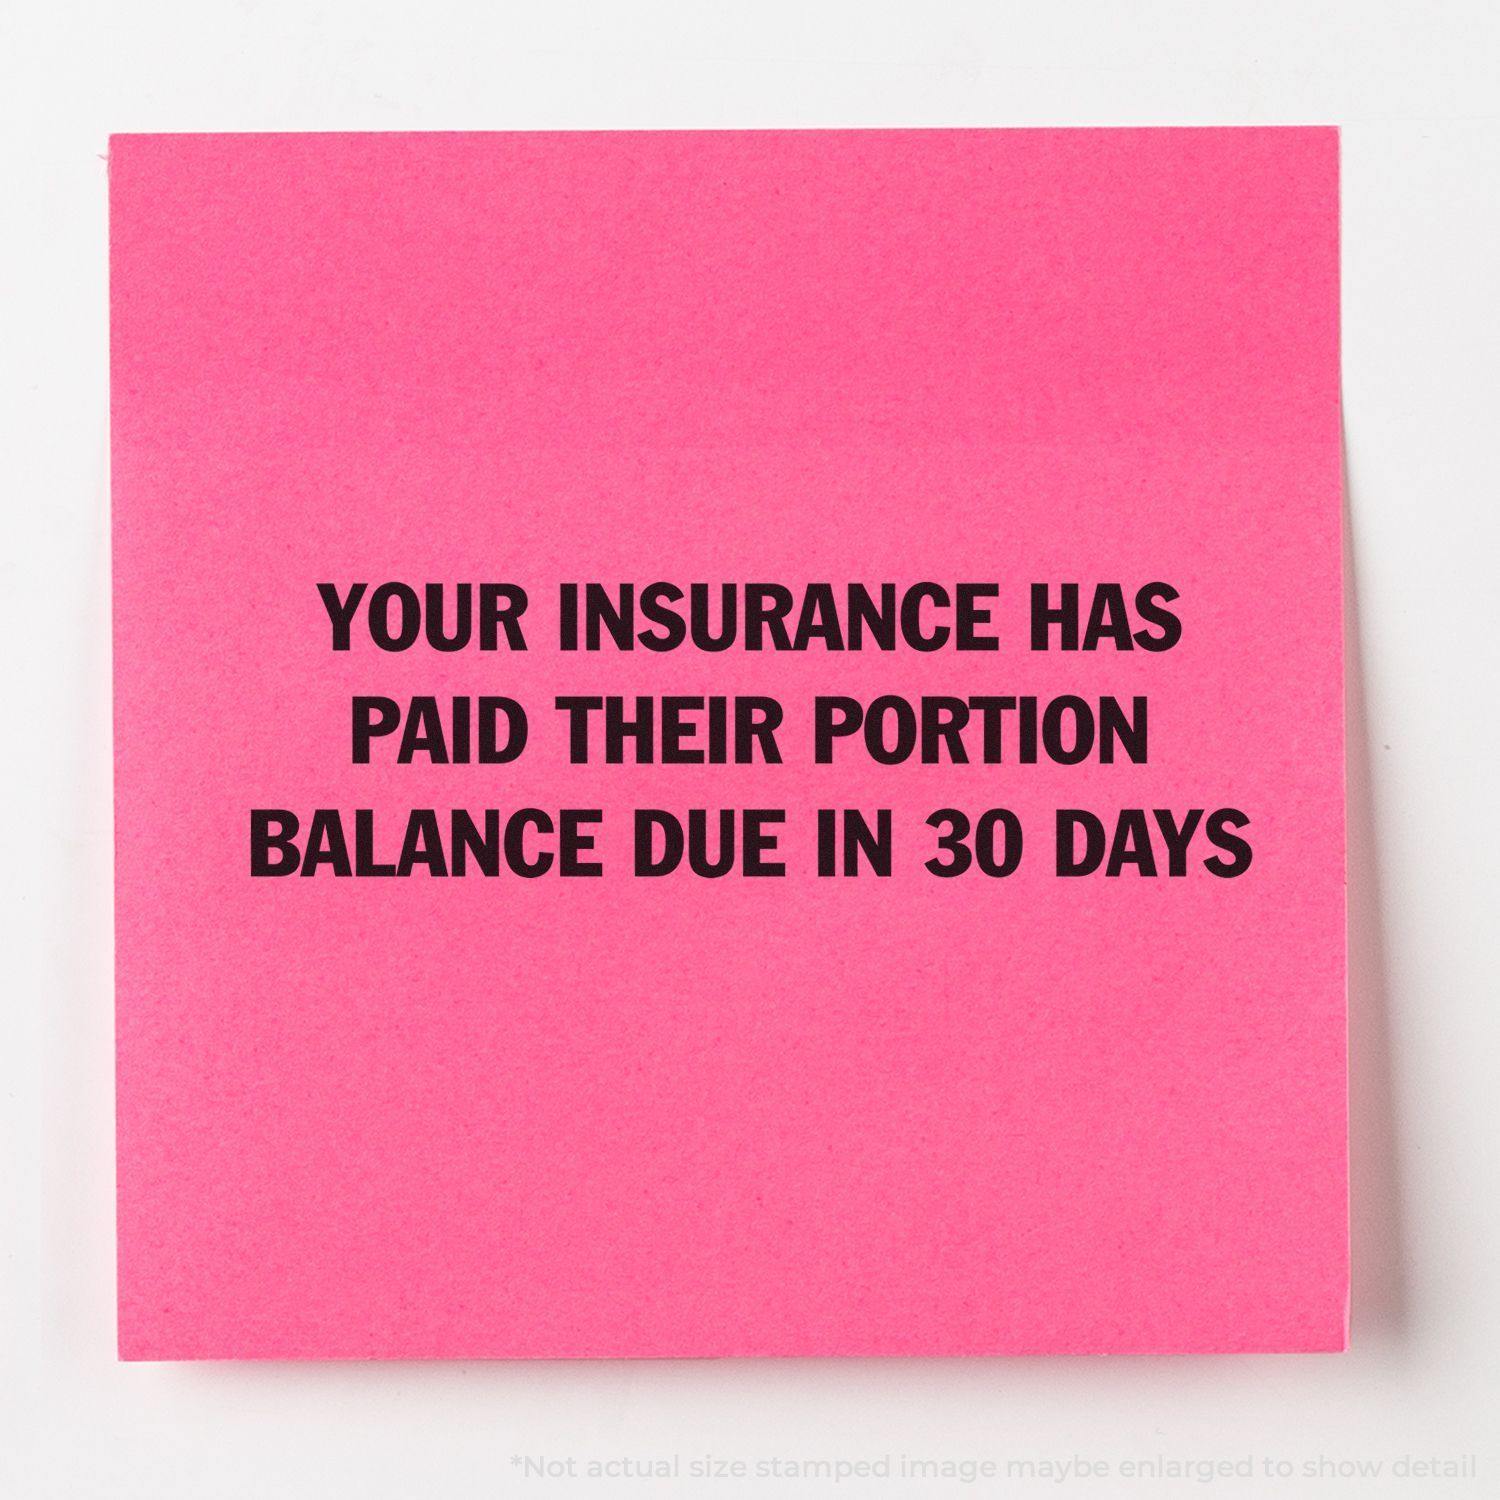 A self-inking stamp with a stamped image showing how the text "YOUR INSURANCE HAS PAID THEIR PORTION" and "BALANCE DUE IN 30 DAYS" in a large font is displayed by it after stamping.